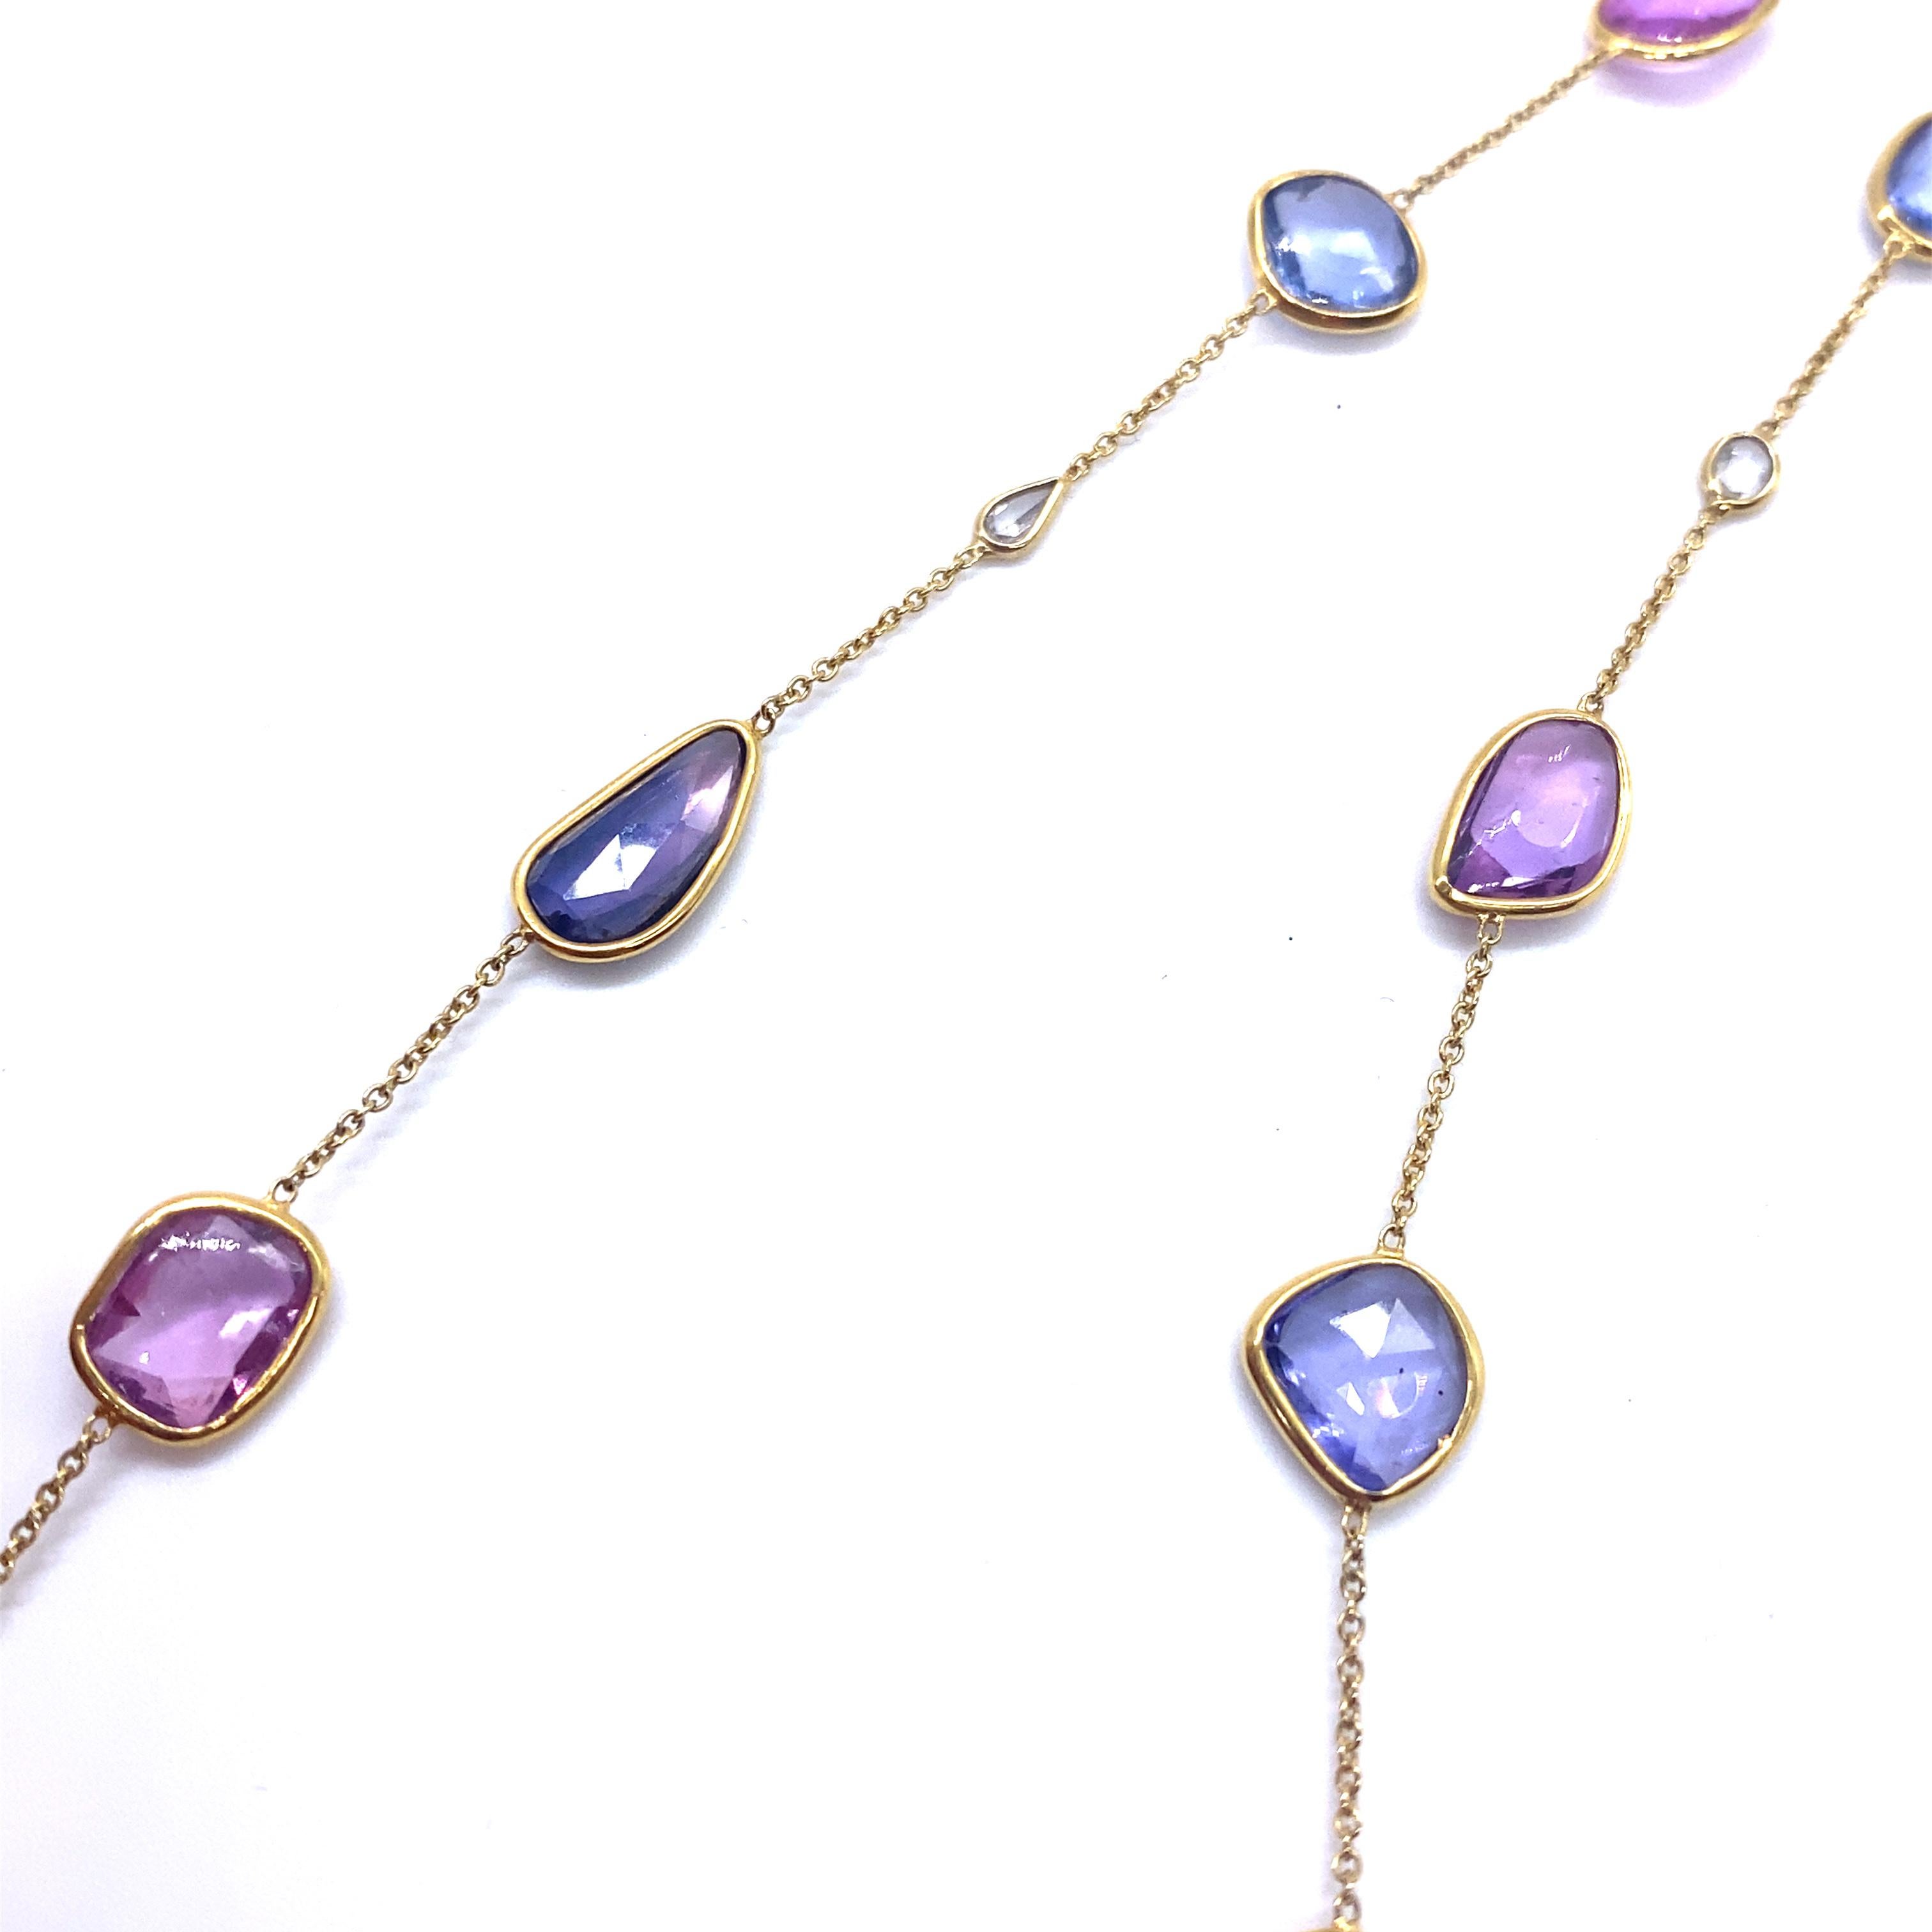 Modern Spectacular Necklace with Colorful Sapphire and 0.50 Carat Rose-Cut Diamonds